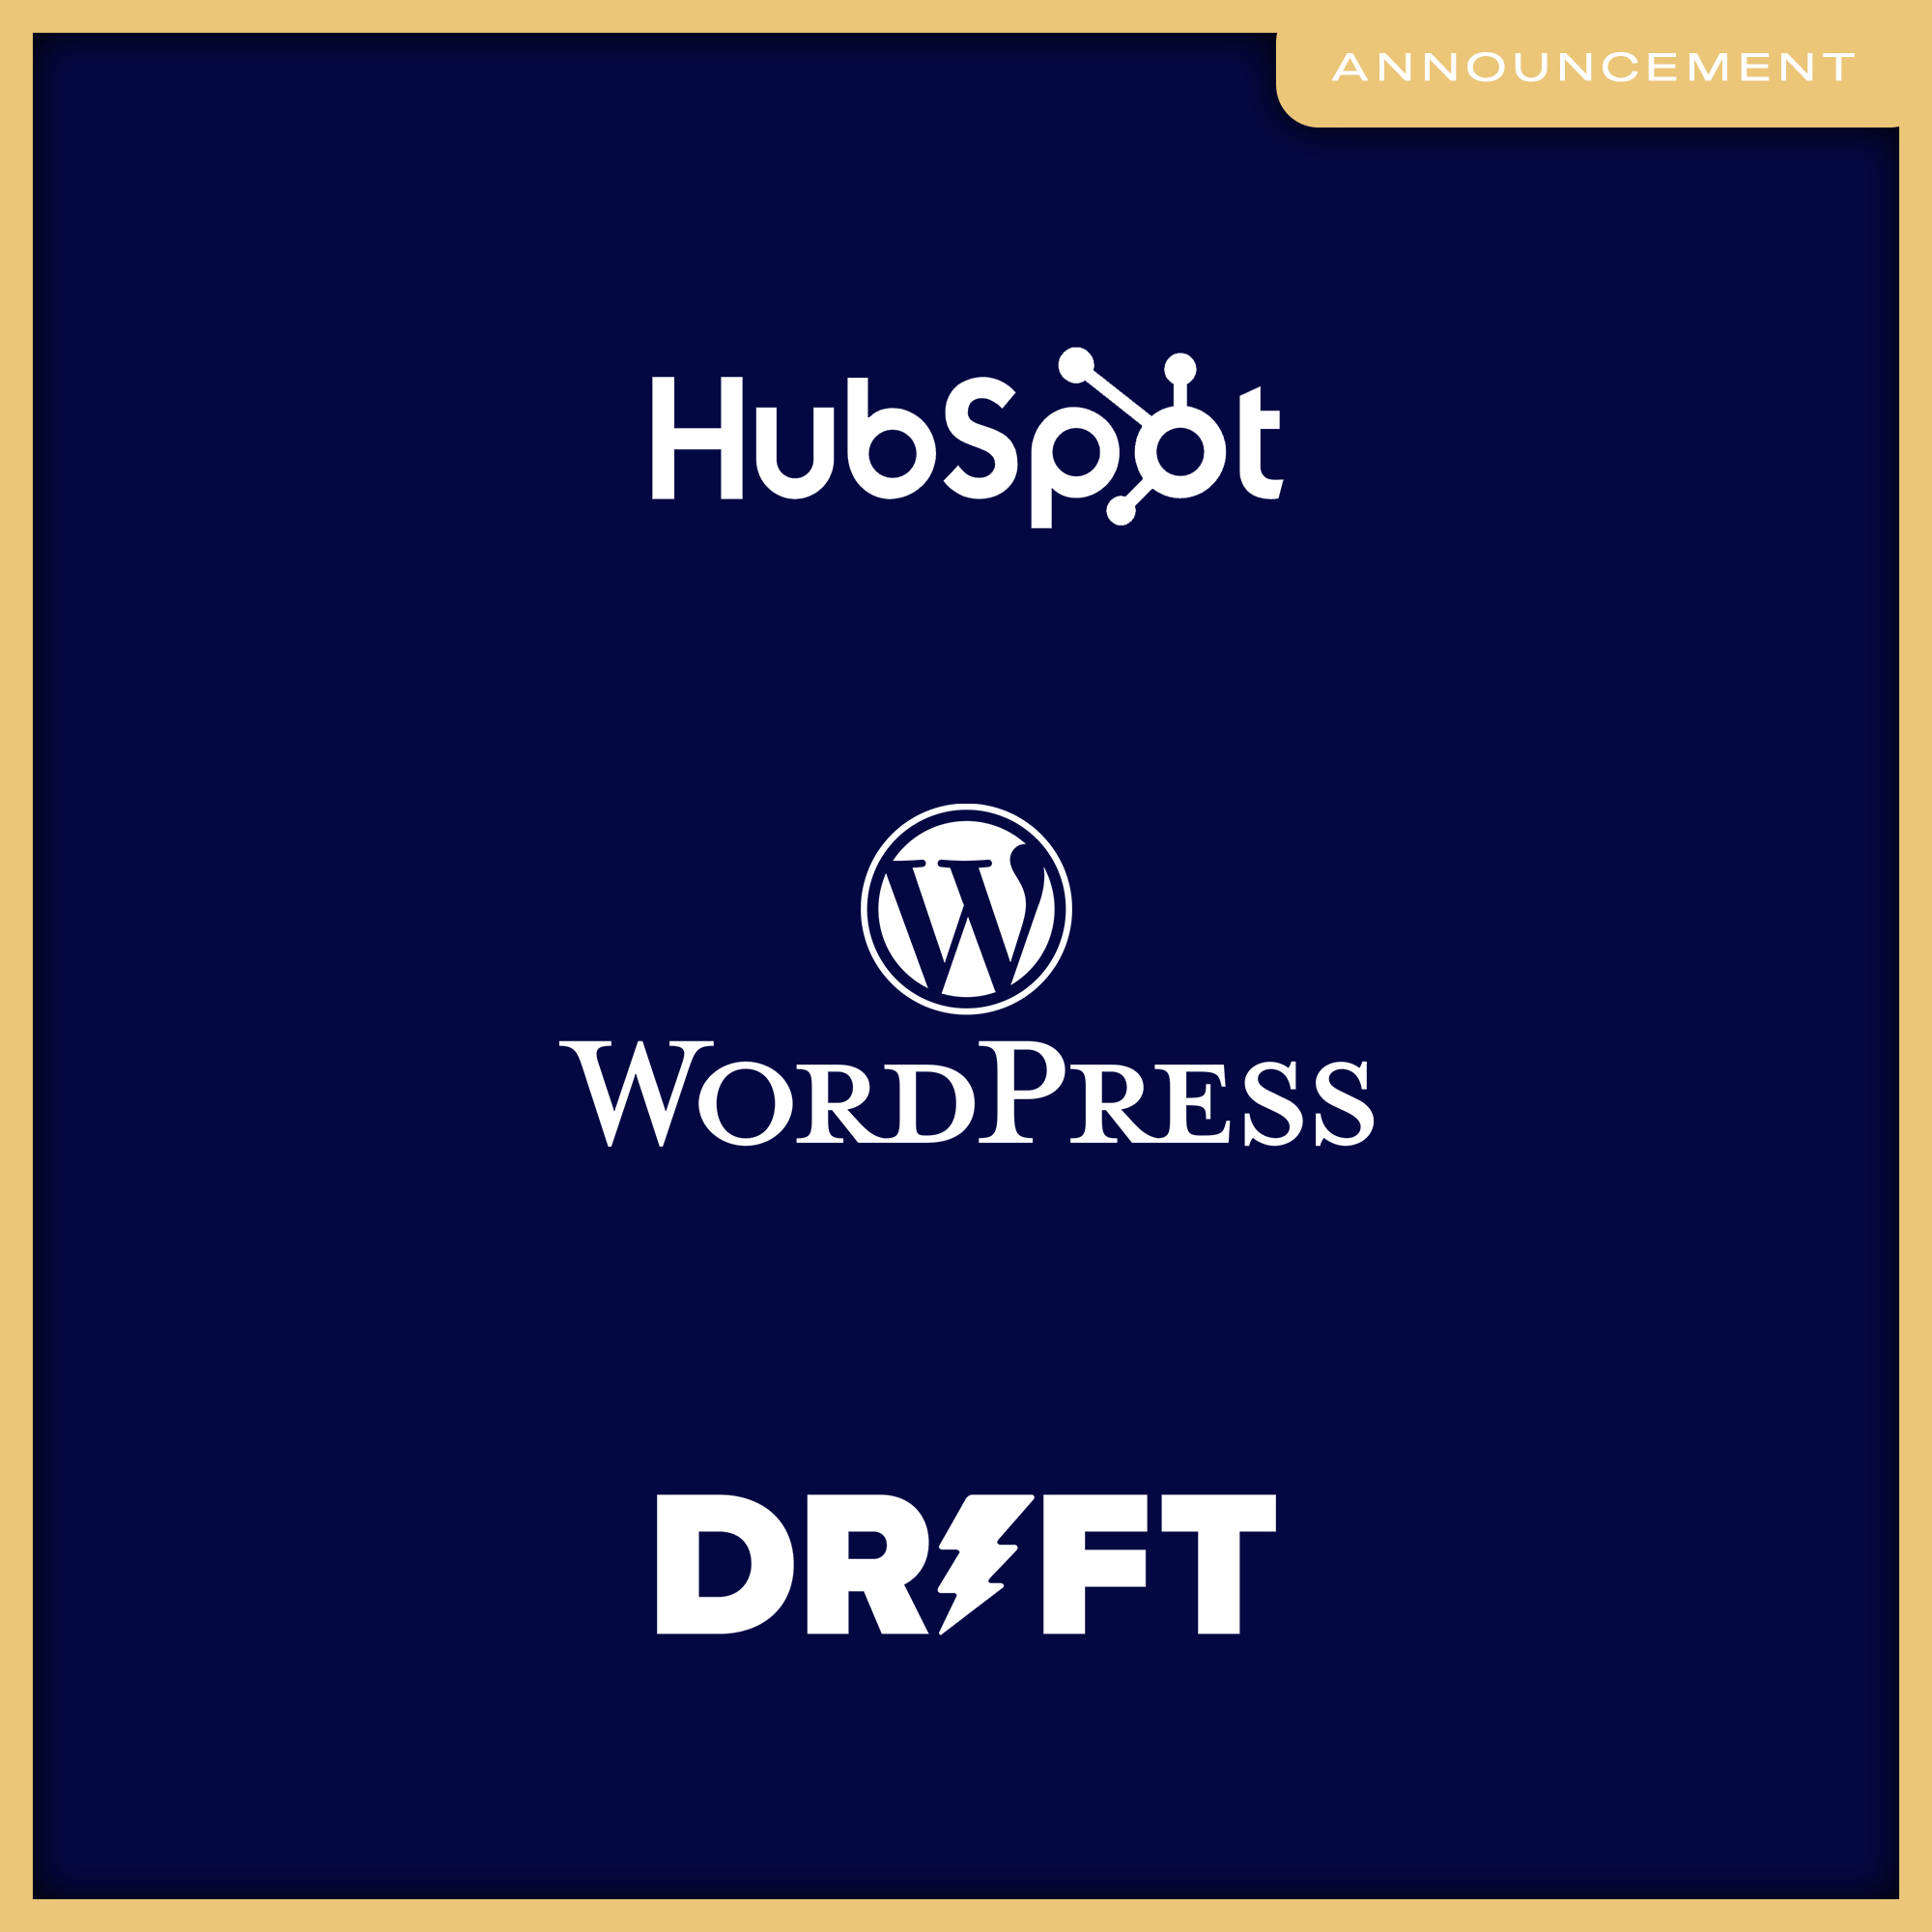 05-Announcement--Casted-Collaborates-with-HubSpot,-WordPress,-and-Drift-to-Further-Facilitate-Conversations-and-Conversions-